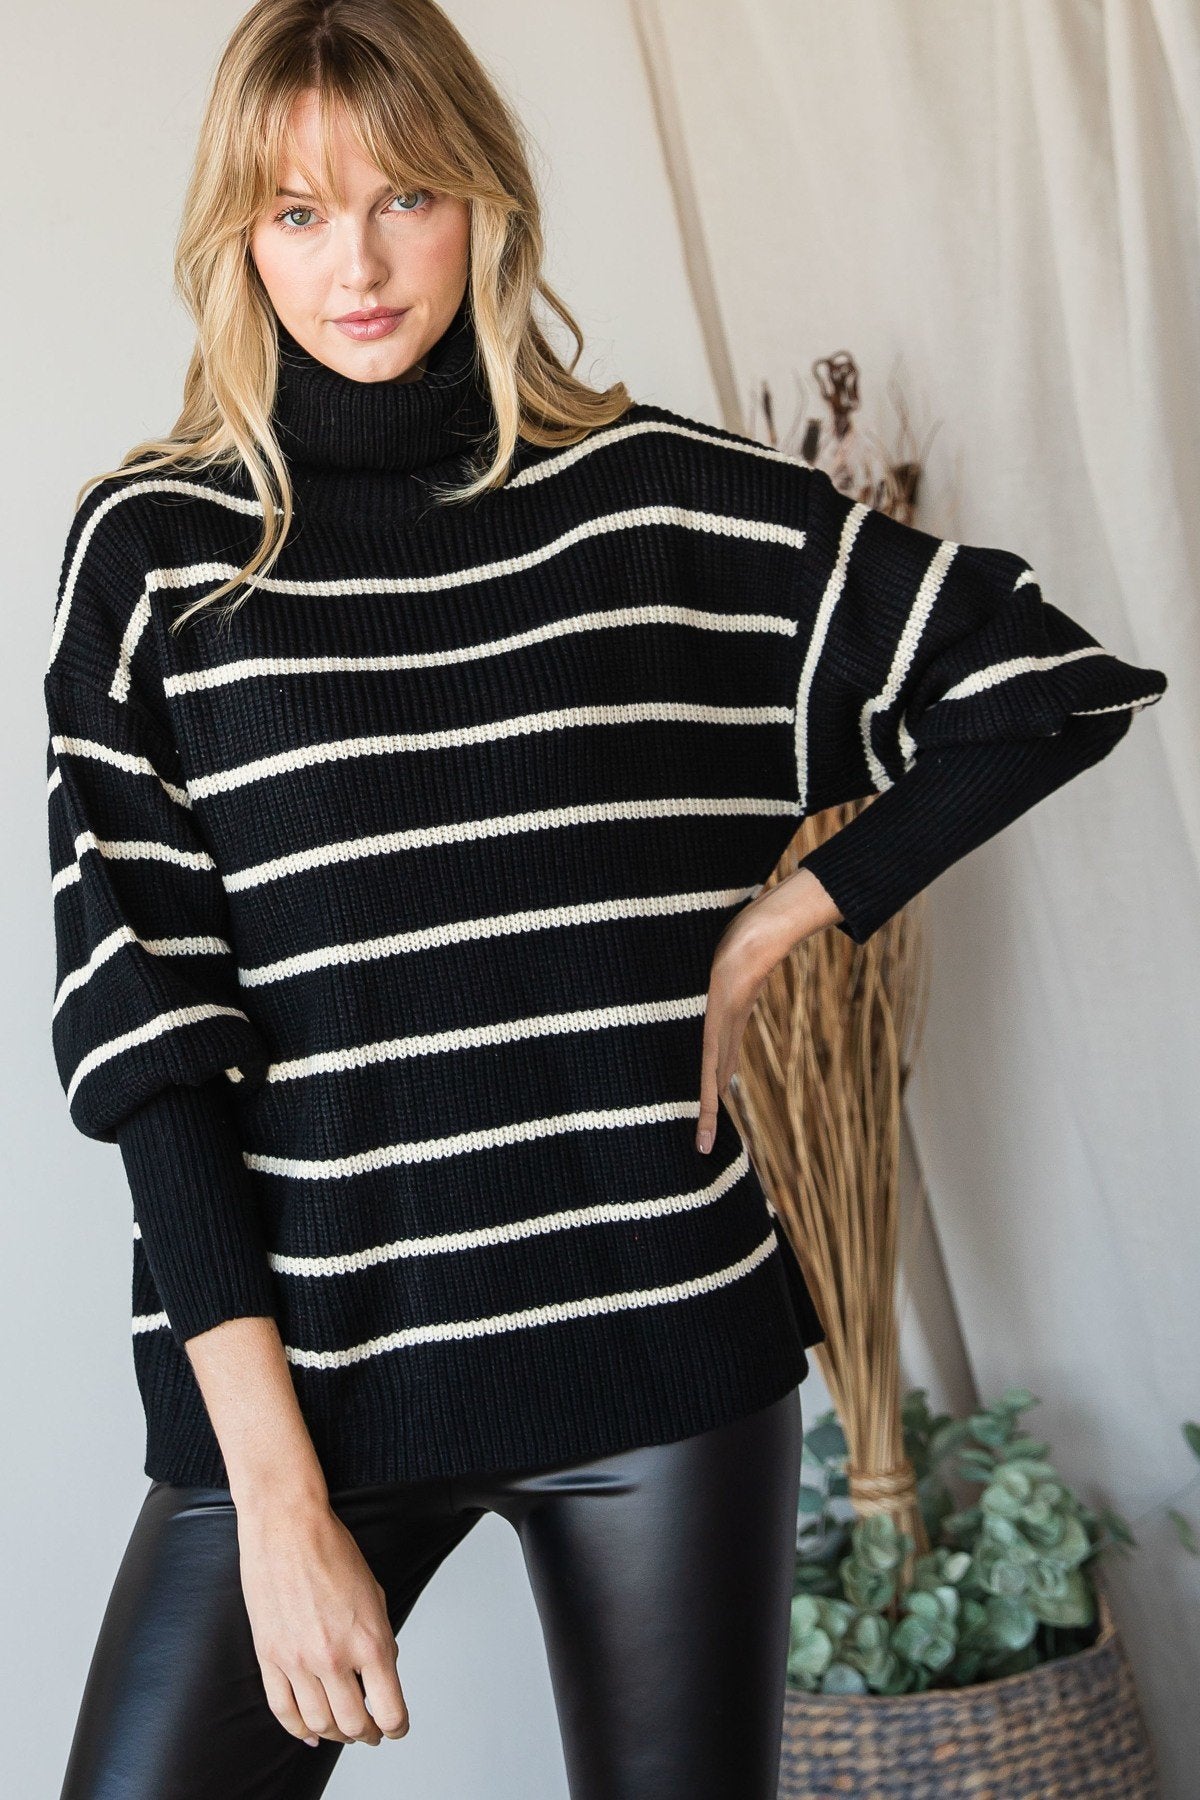 Heavy Knit Striped Turtle Neck Knit Sweater  | KIKI COUTURE-Women's Clothing, Designer Fashions, Shoes, Bags